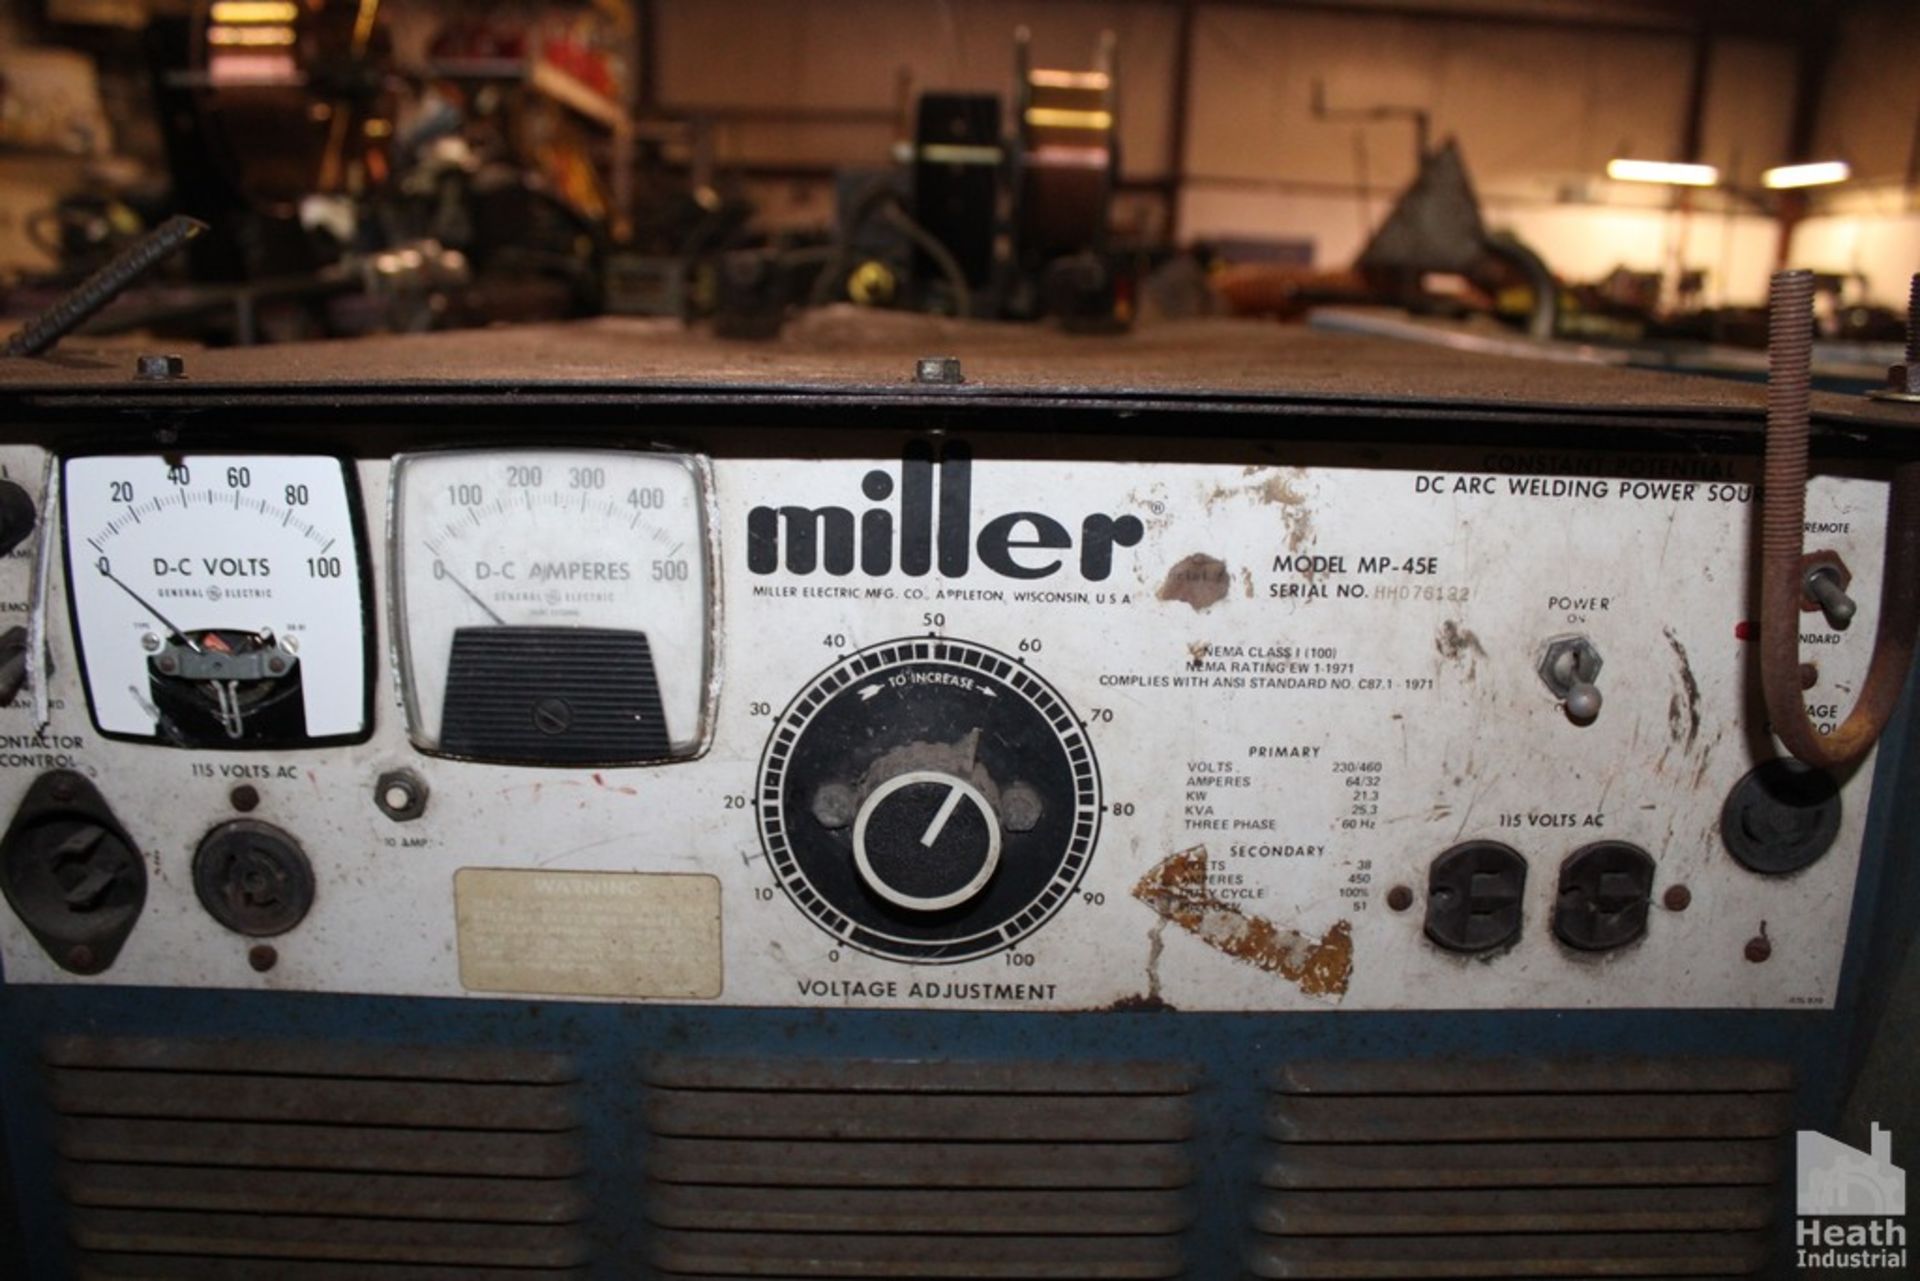 MILLER MODEL MP45E CONSTANT POTENTIAL DC ARC WELDING POWER SOURCE WITH CART, S/N HH0761221 - Image 3 of 4